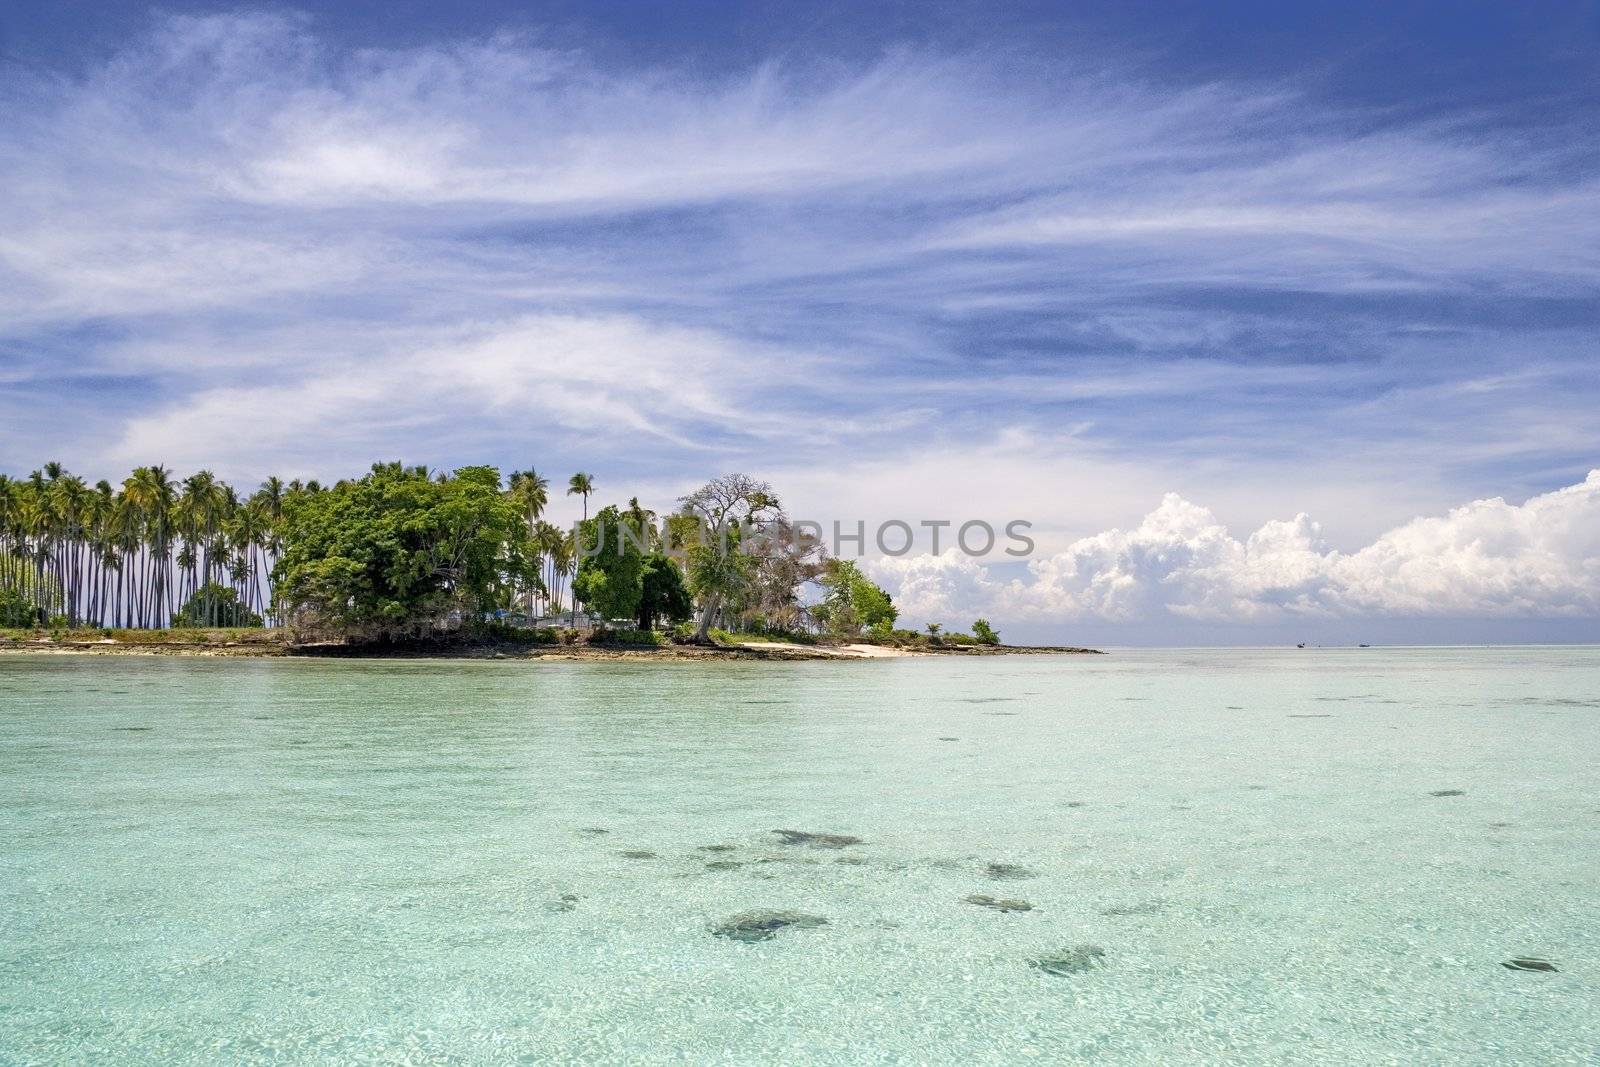 Image of a remote Malaysian tropical island with deep blue skies, crystal clear waters and coconut trees.